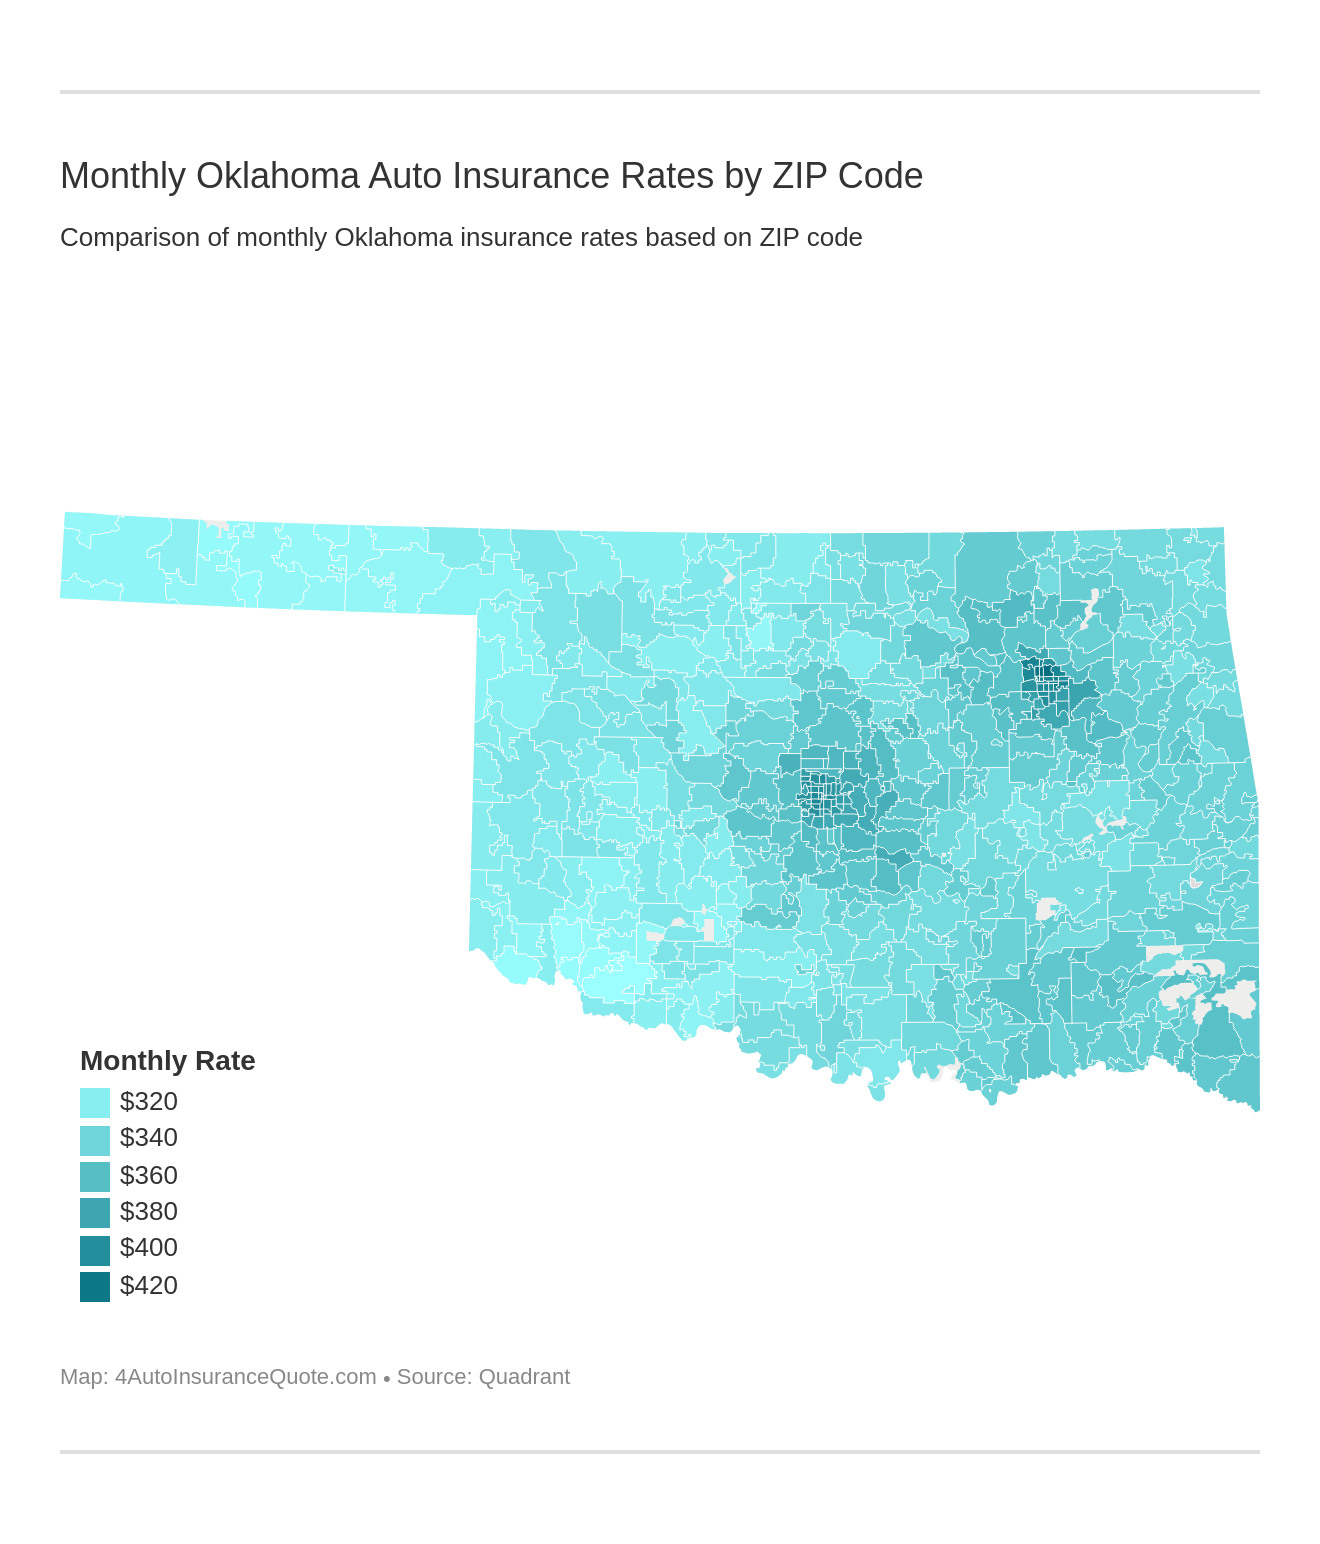 Monthly Oklahoma Auto Insurance Rates by ZIP Code